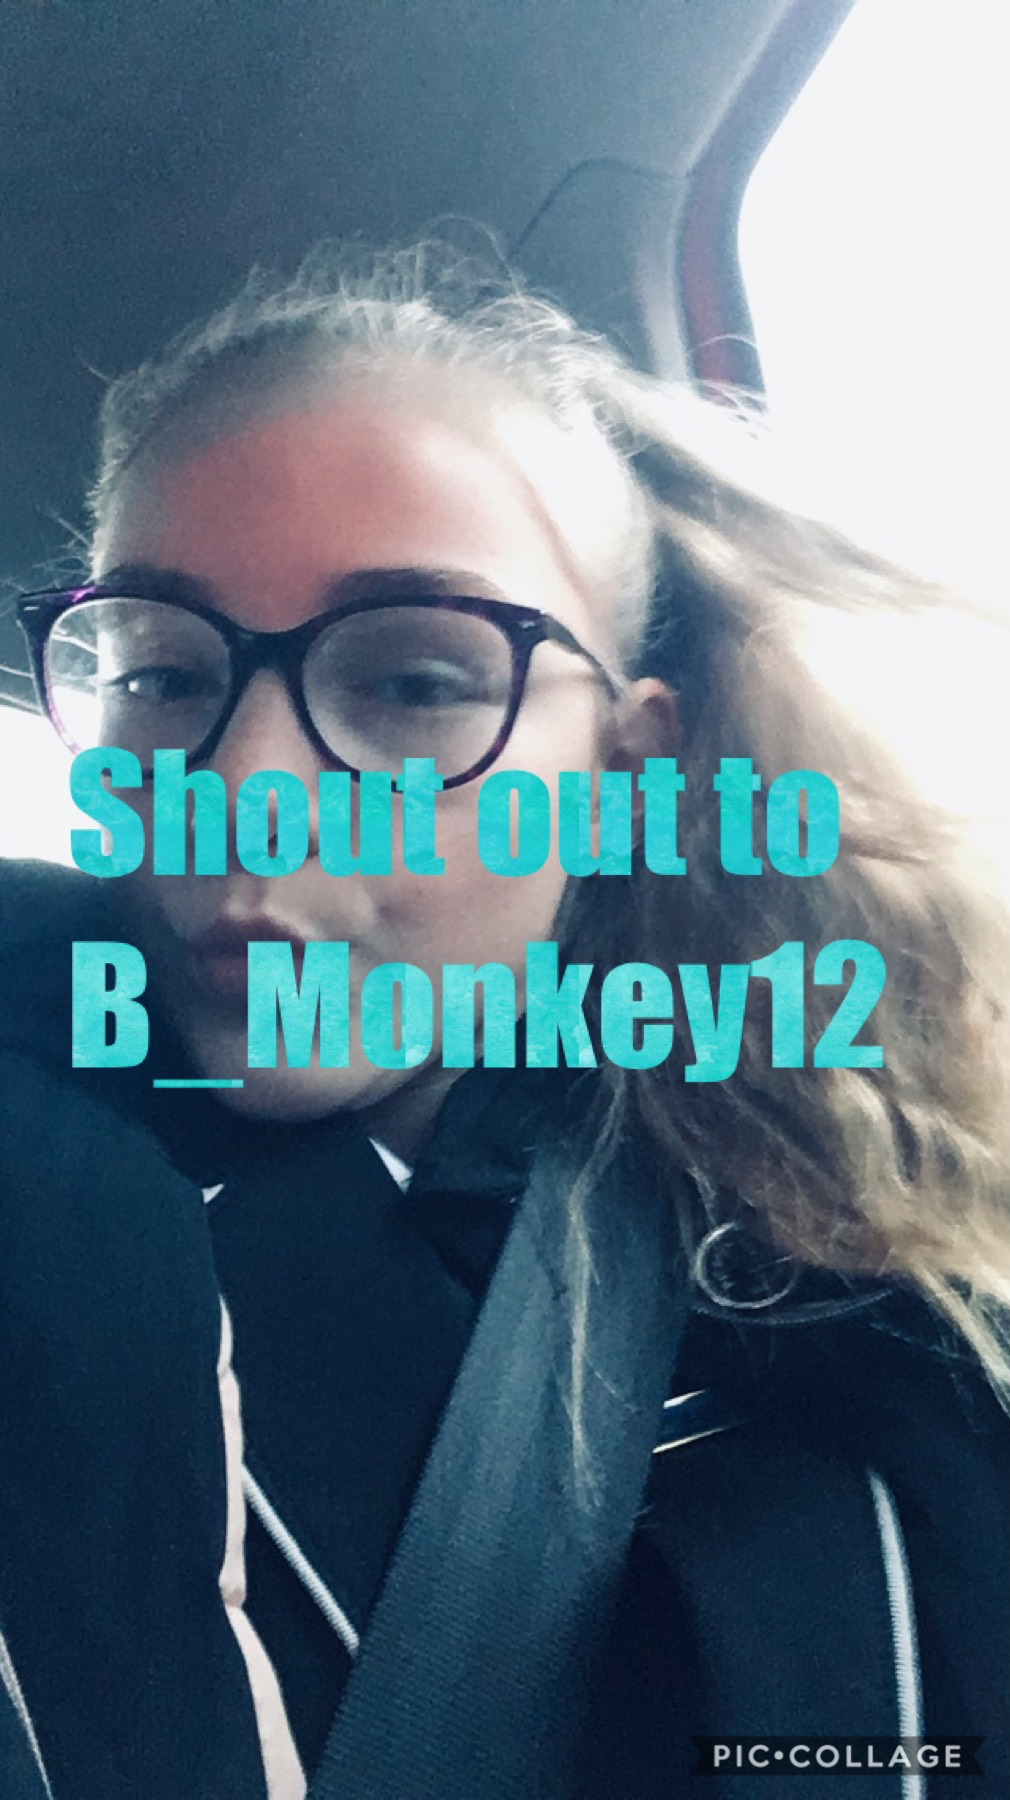 Go check out B_Monkey12 account it’s funny and creative 😝❤️